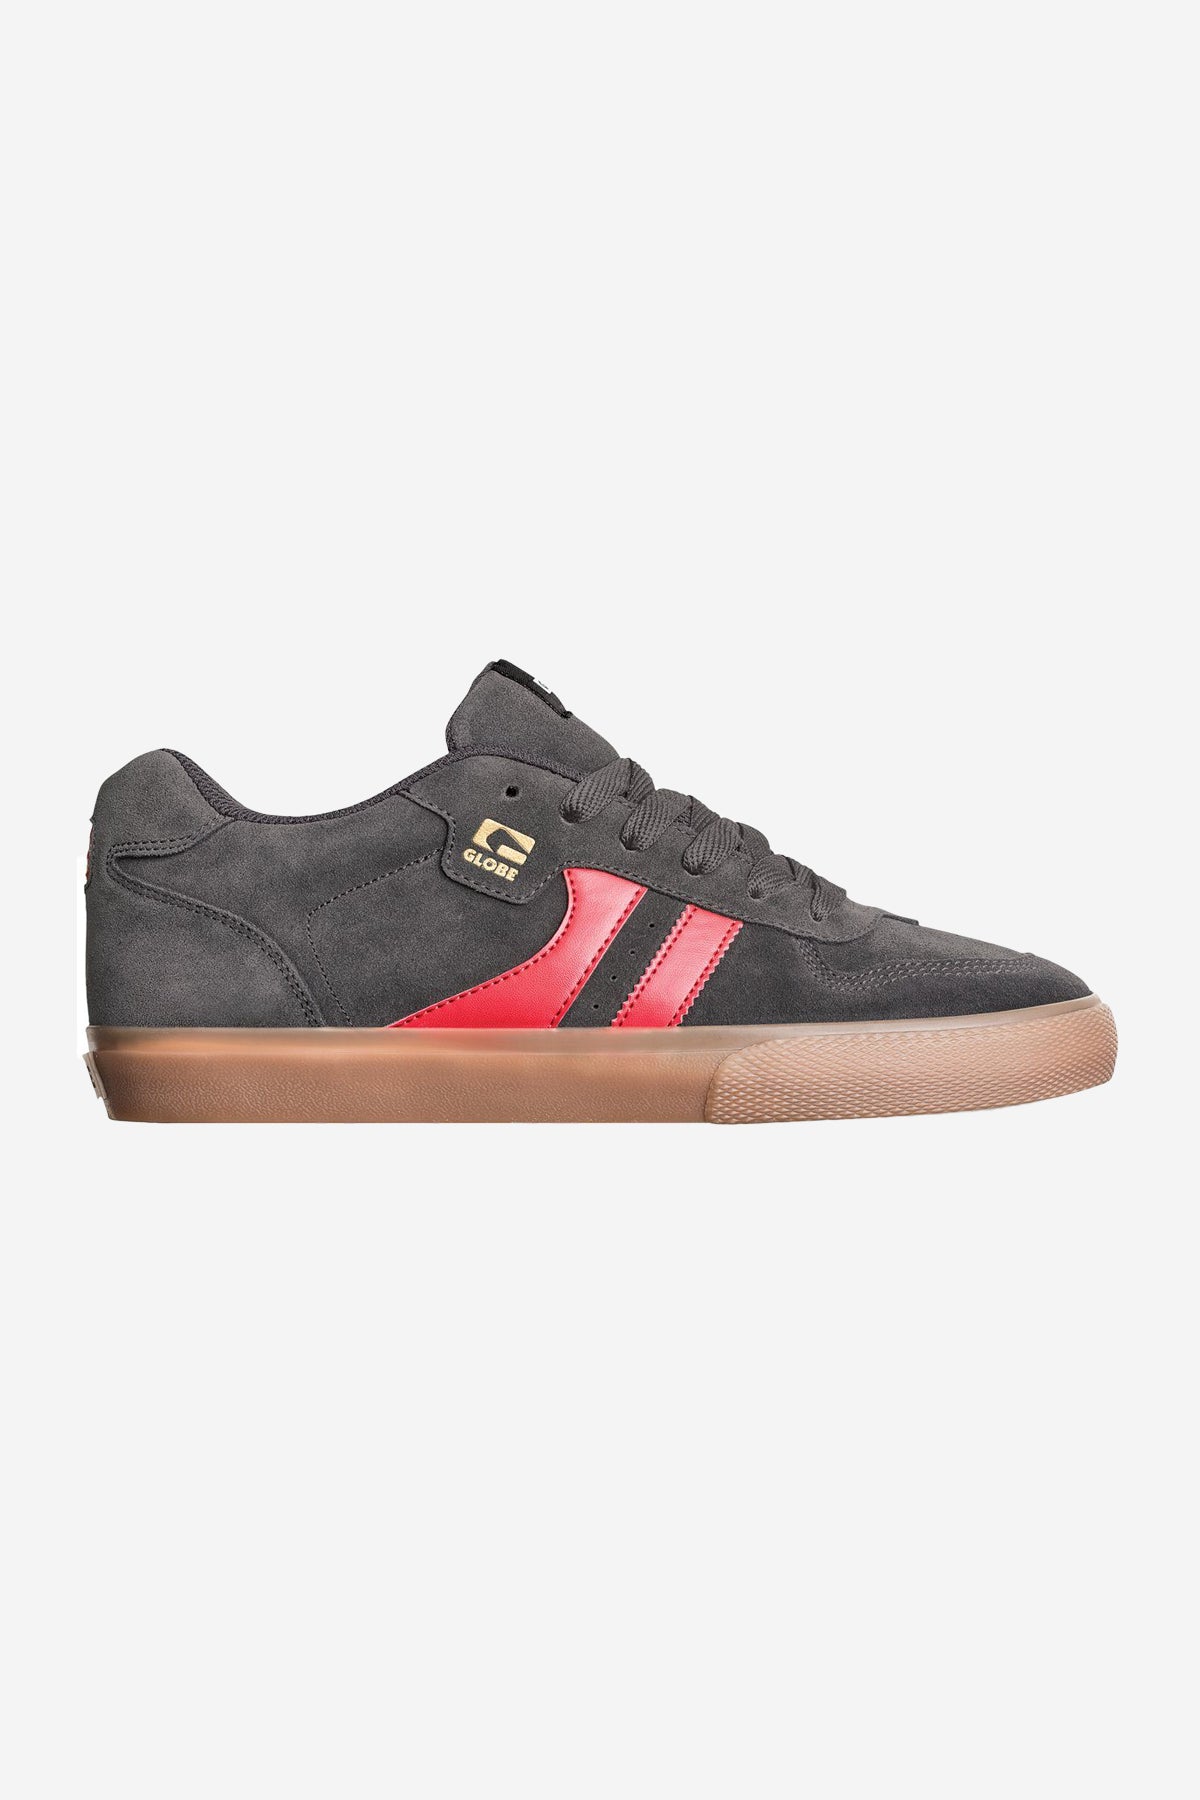 Globe - Encore 2 - Charcoal/Gum/Red - skateboard Chaussures